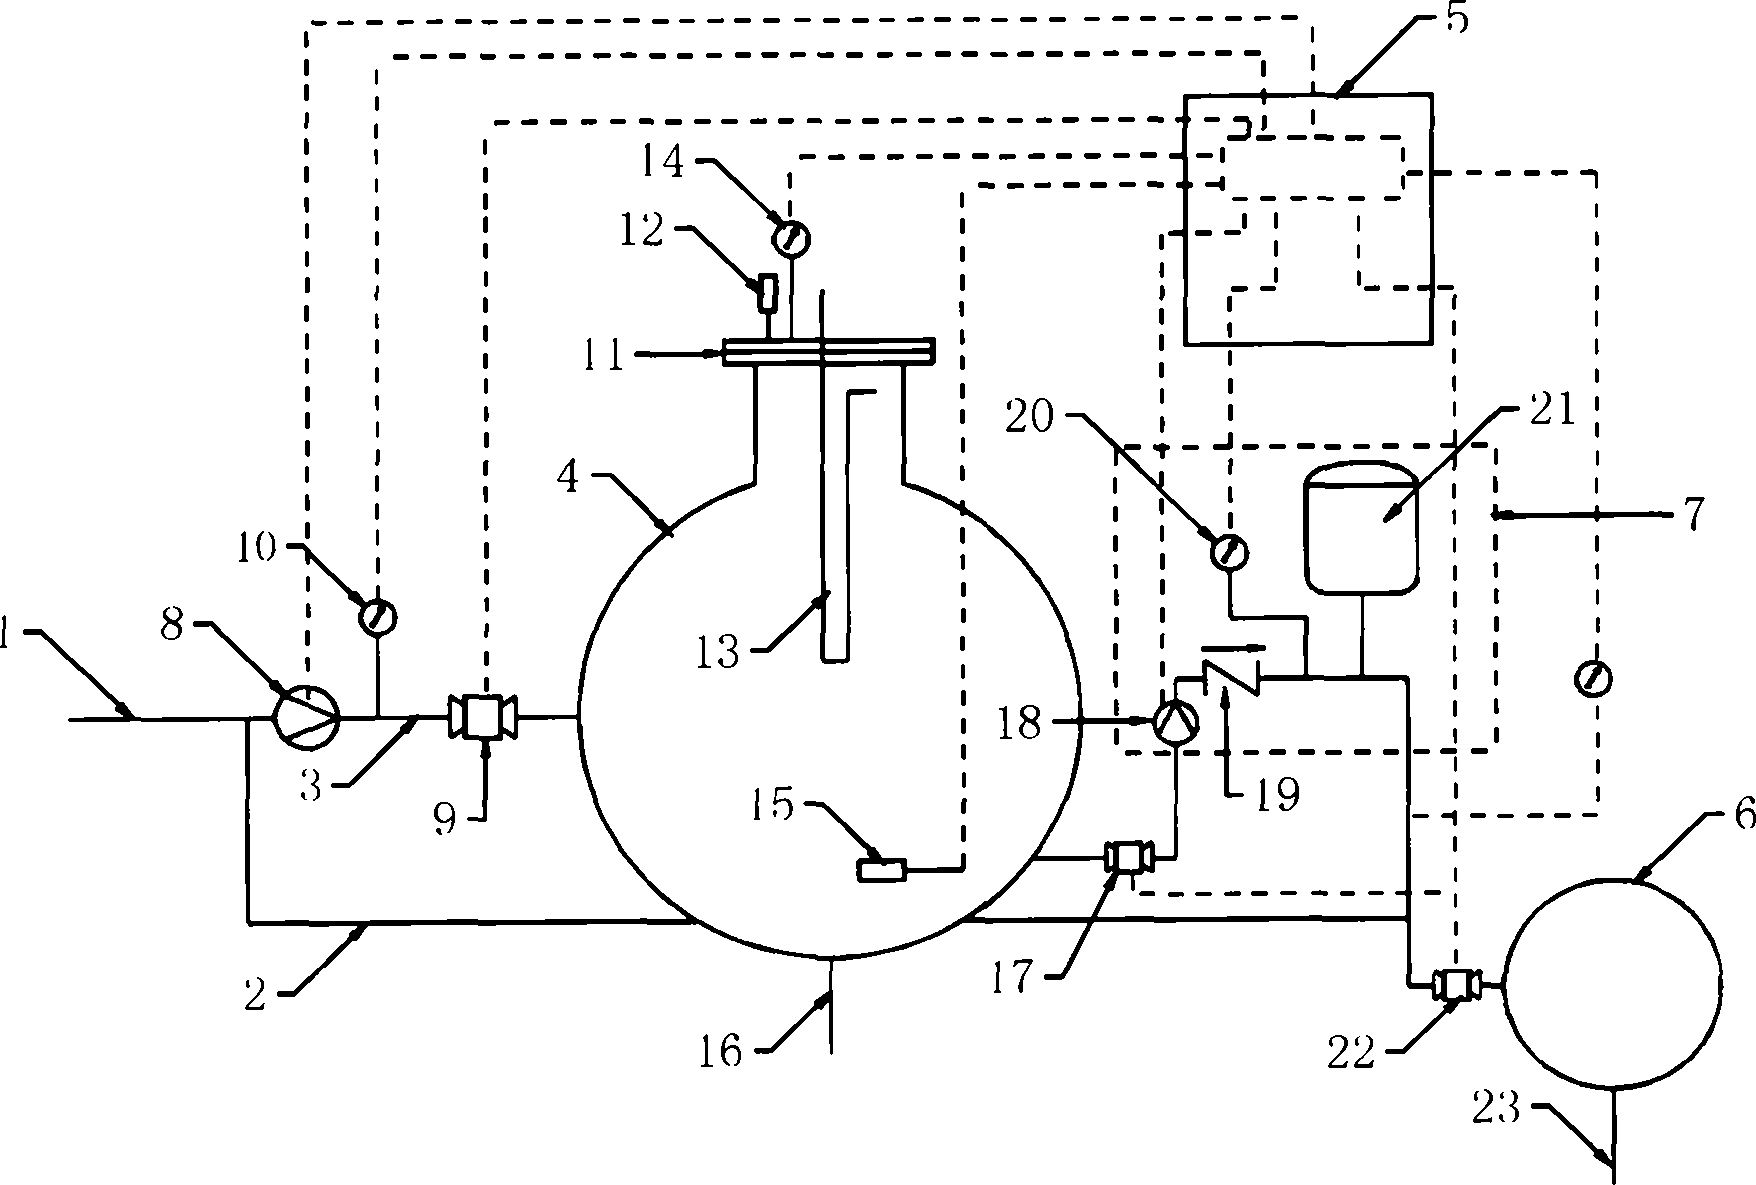 Tail end supercharging device applied to pipeline network of tap water